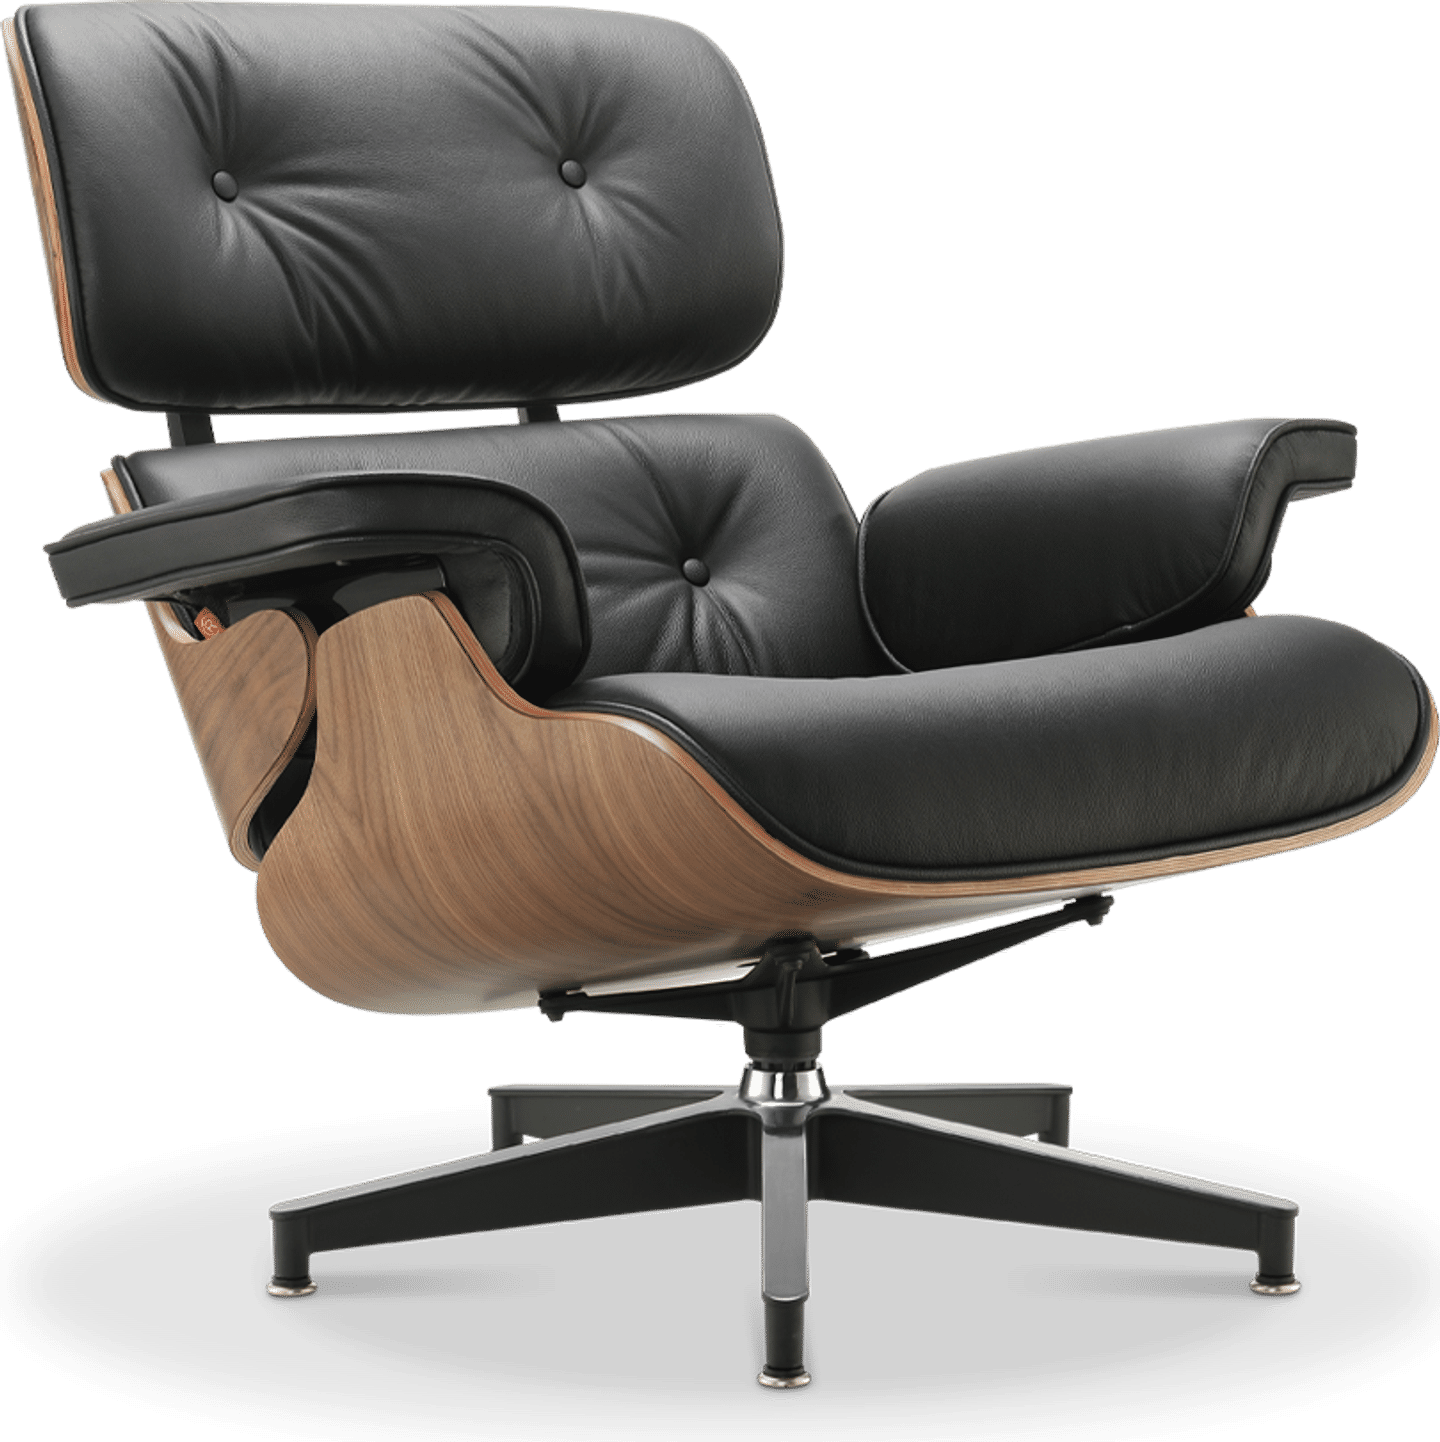 Eames Style Lounge Chair H Miller Version Italian Leather/Black/Walnut image.